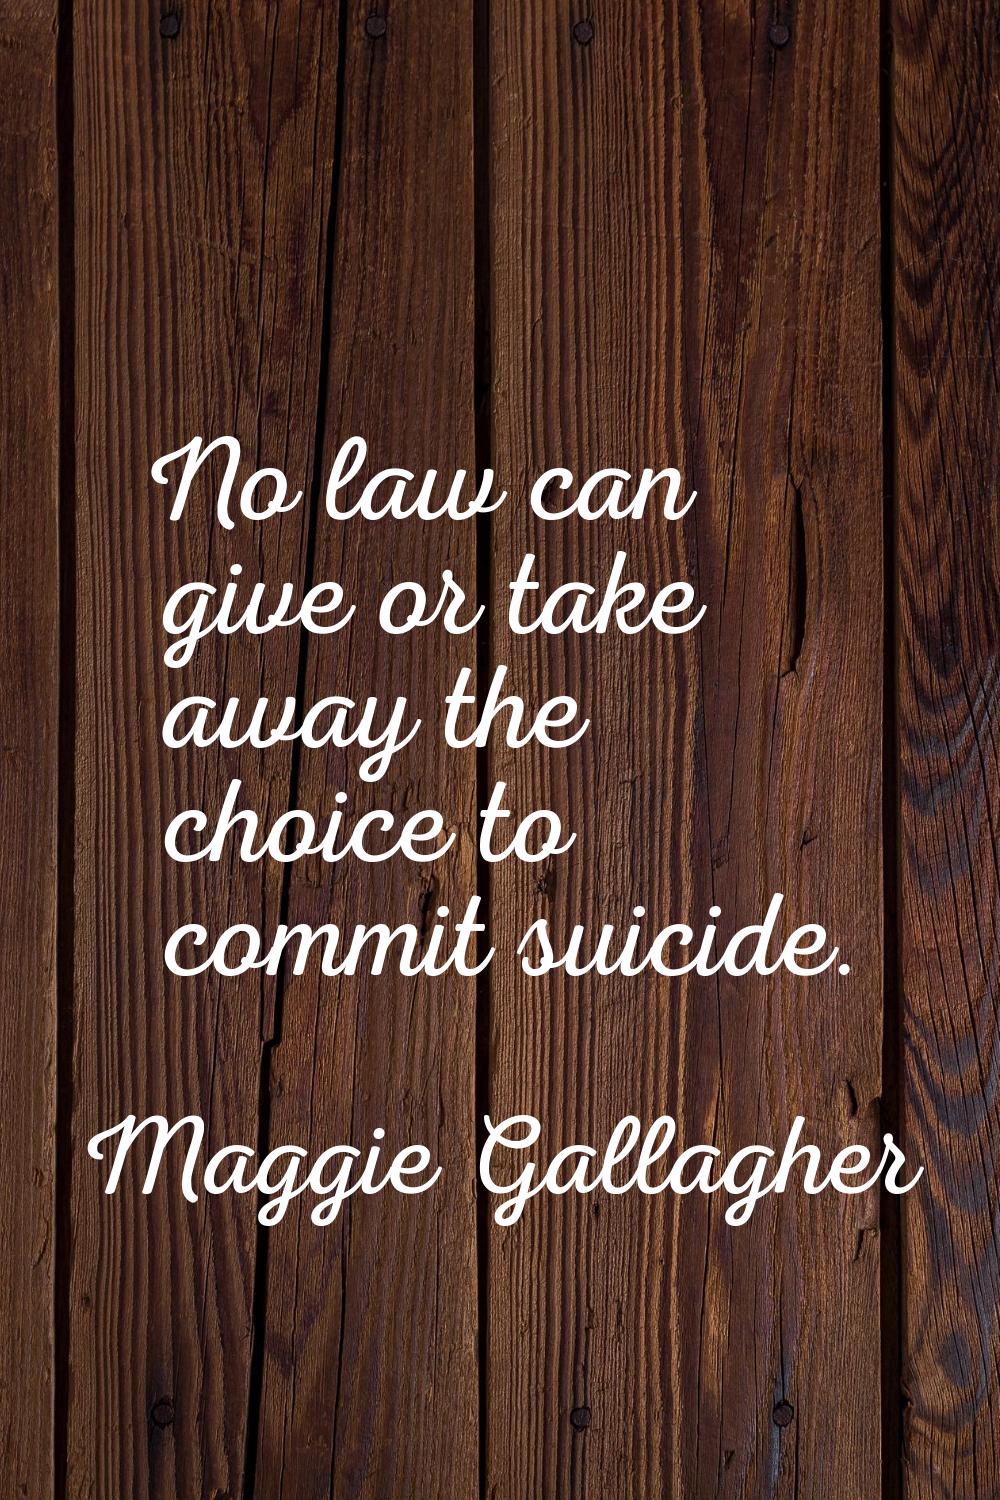 No law can give or take away the choice to commit suicide.